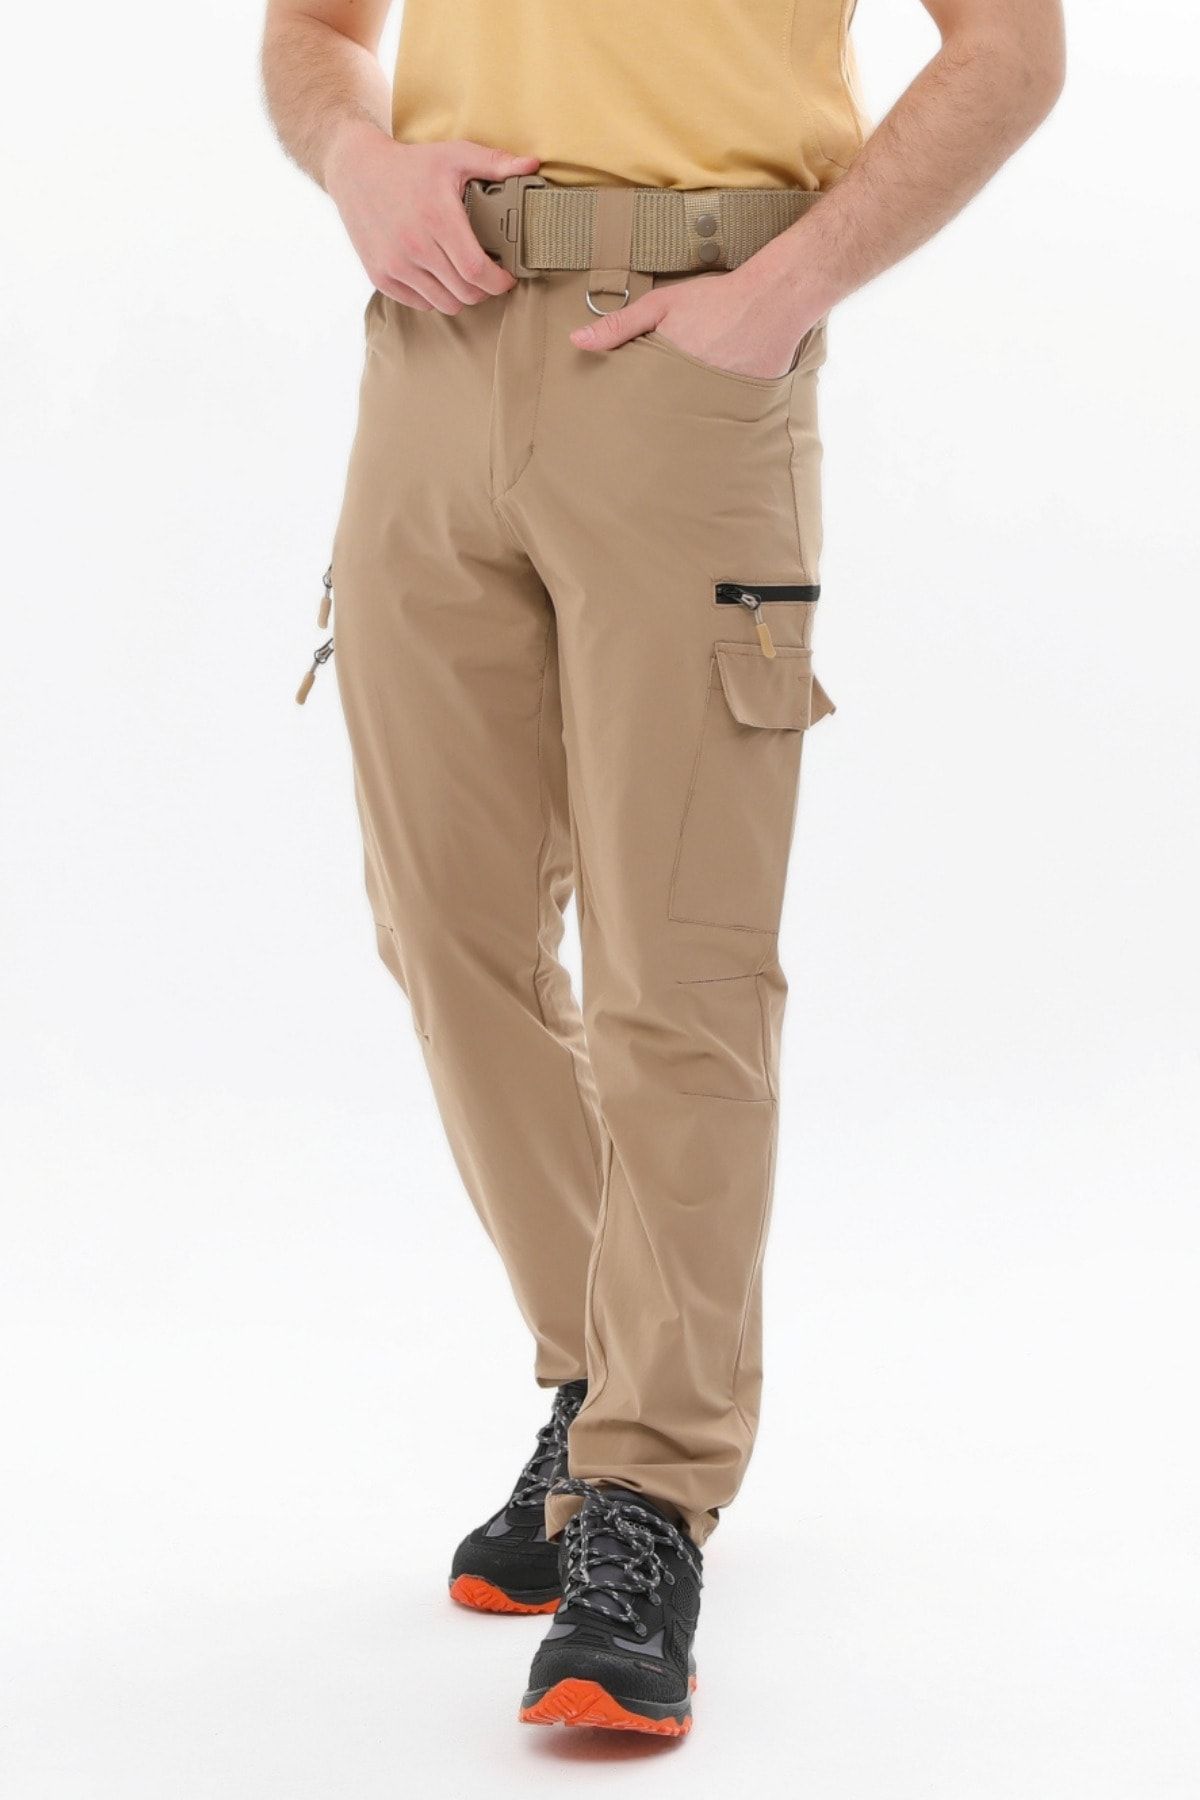 5.11 Tactical Outdoor Tactical Trousers - Trendyol